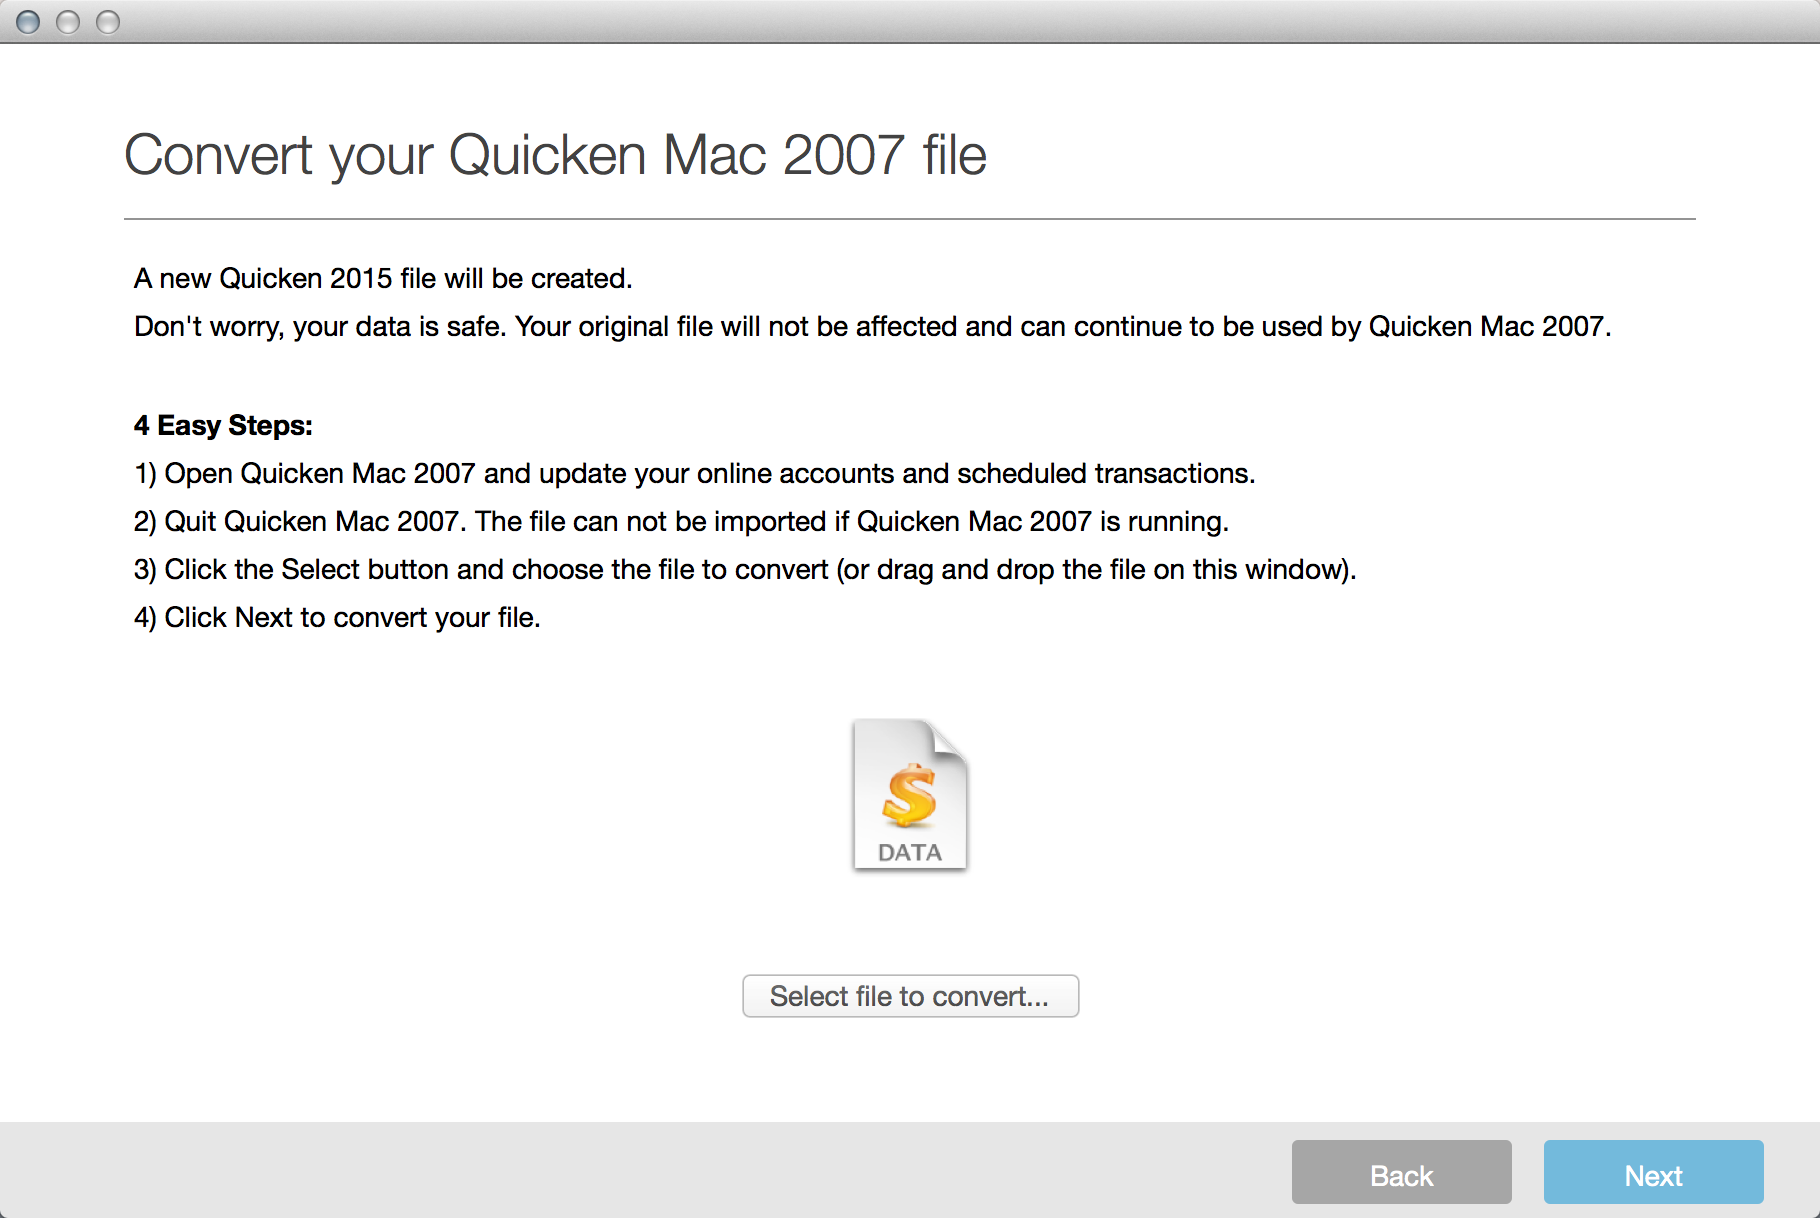 Can 2007 Quicken For Mac Files Be Used By Quicken For Windows 10?